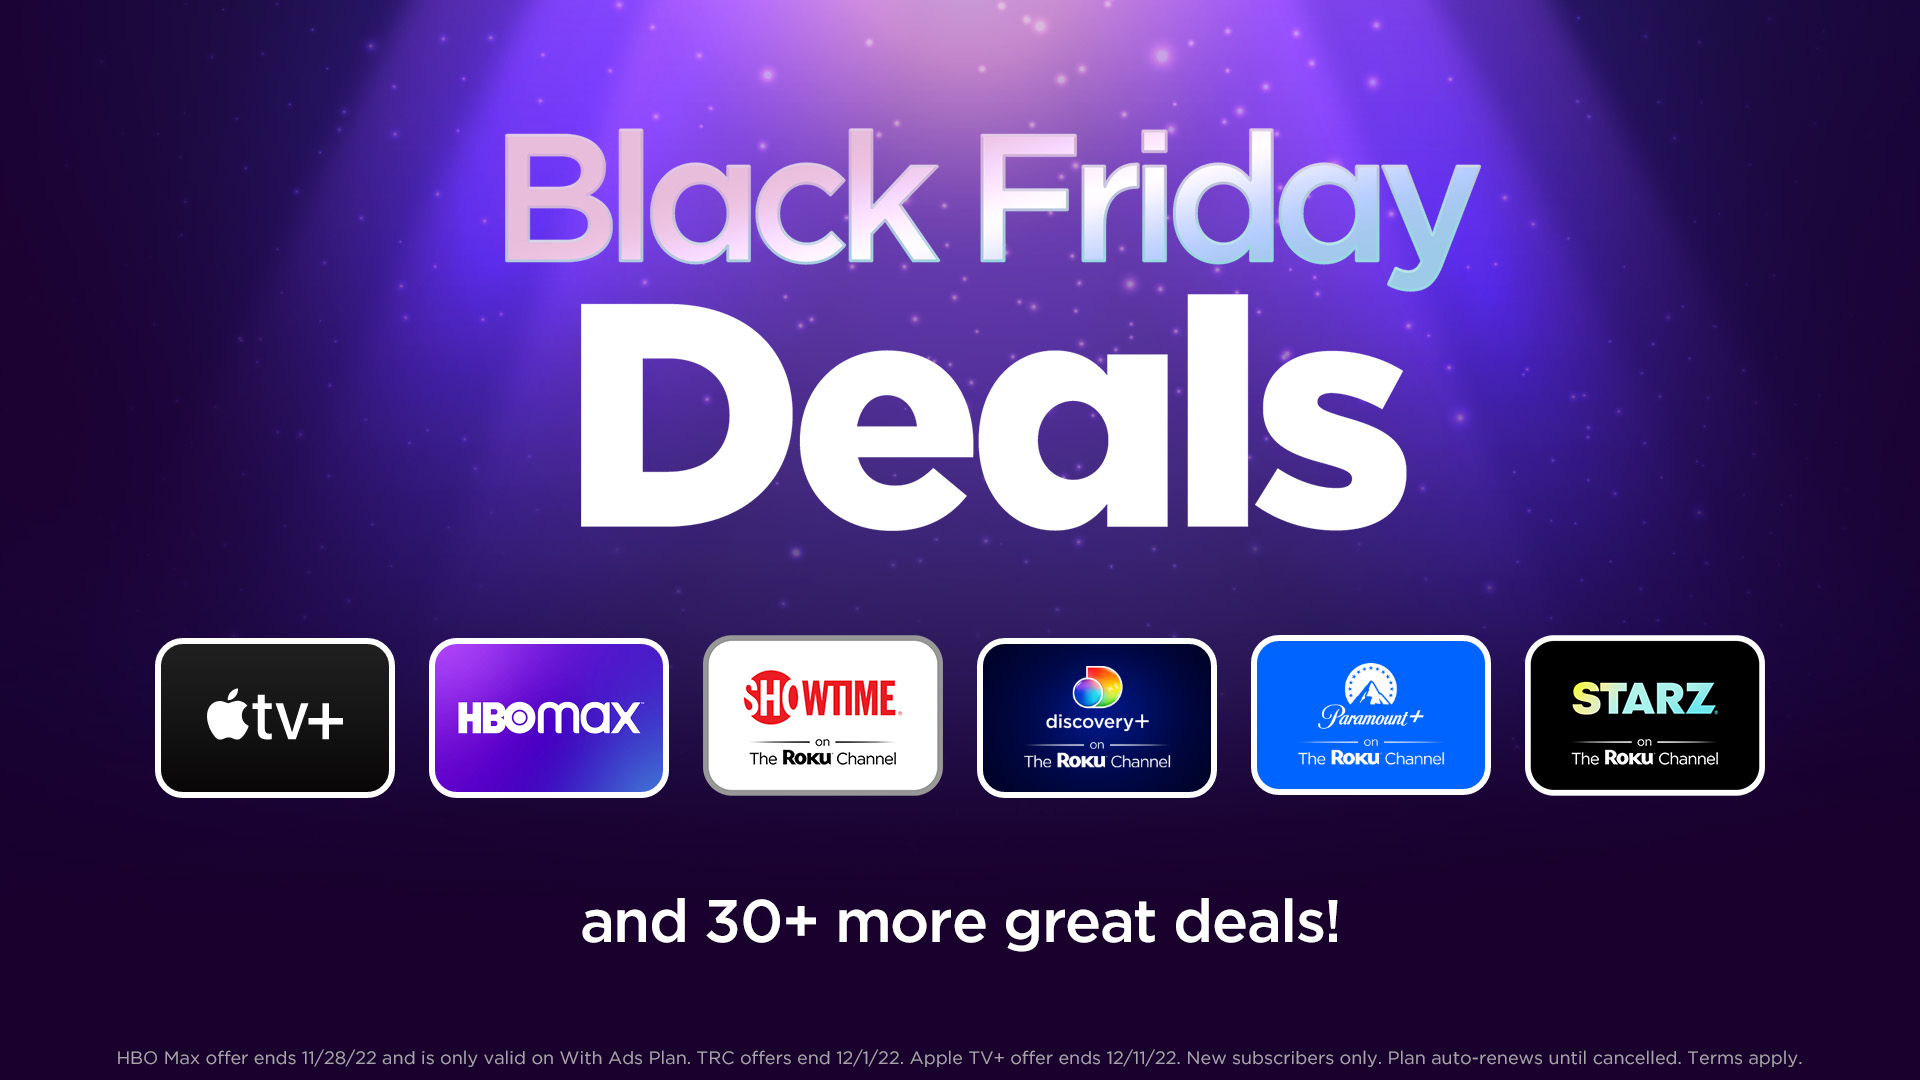 Roku Announces $19 Roku Premiere Available this Black Friday